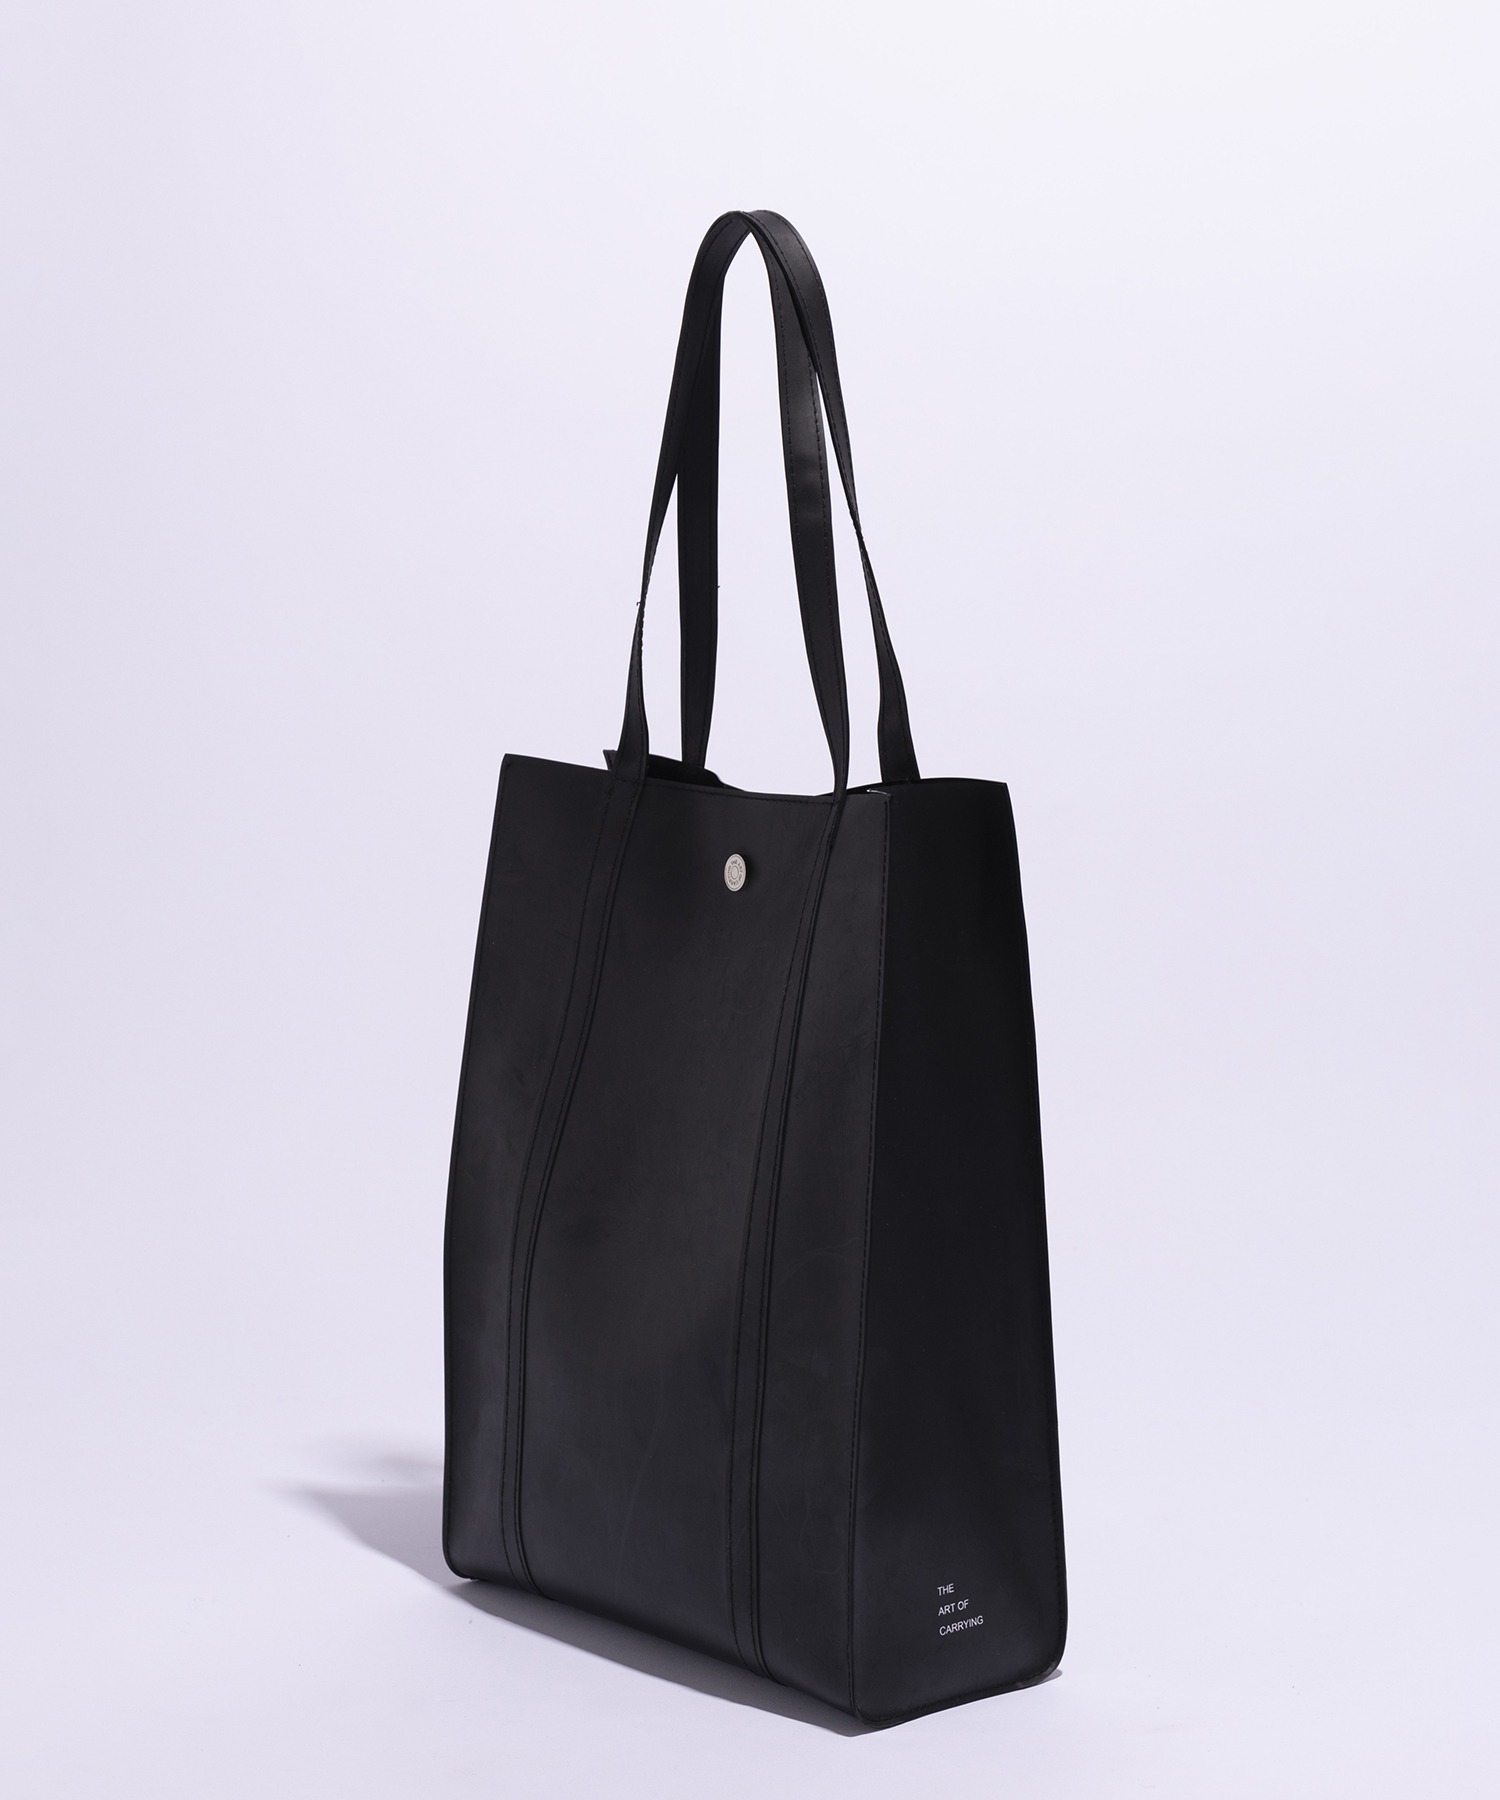 THE ART OF CARRYING / ジ・アートオブキャリング】TOTE C / 軽量